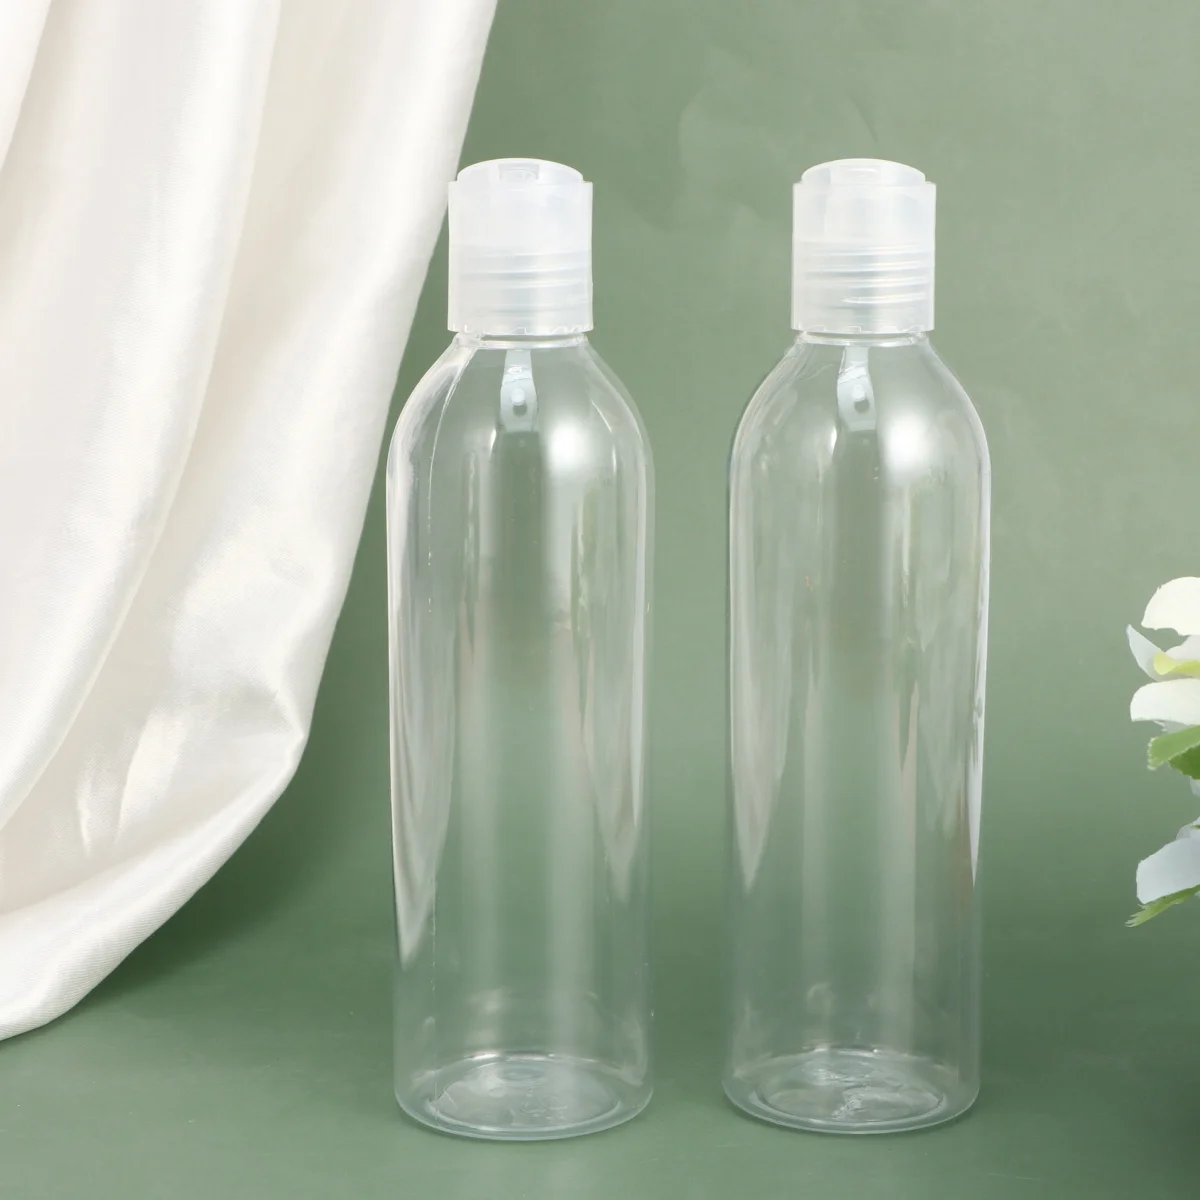 

6pcs Empty Bottles Refillable Bottles with Cap Travel Bottle Containers for Shampoo Lotion, 250ml ( Transparent )